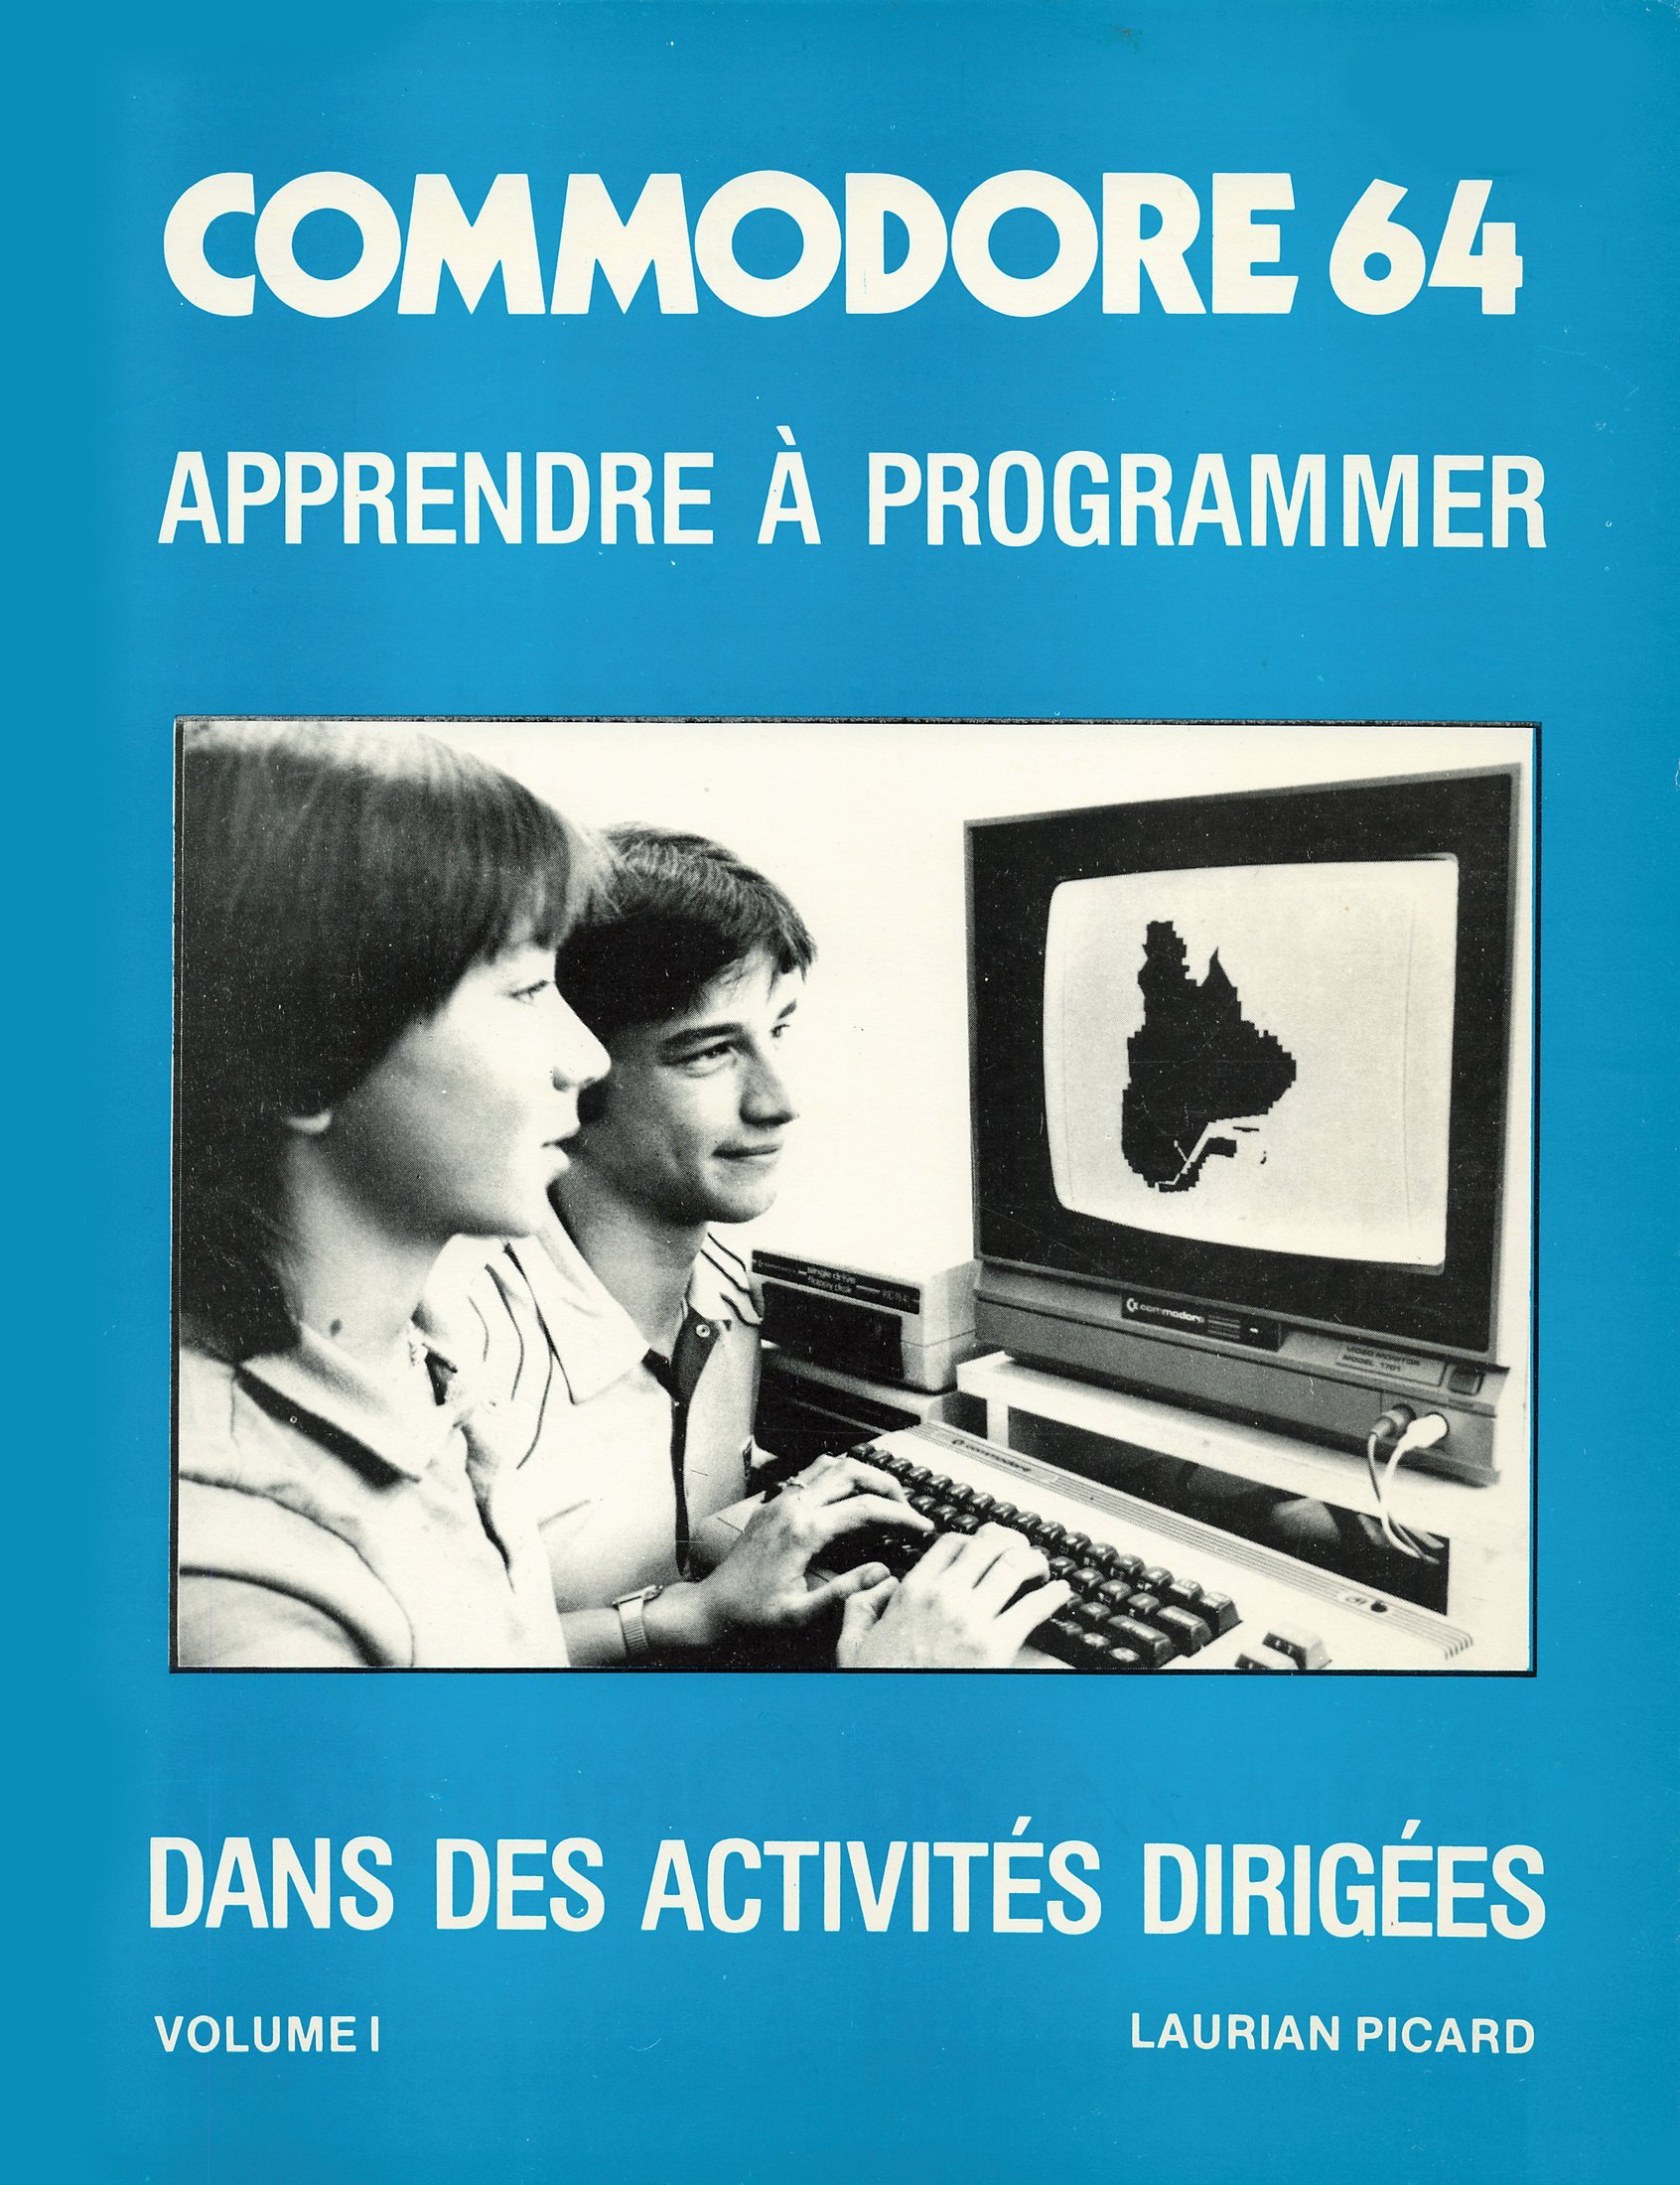 Commodor 64 - Programming (French)